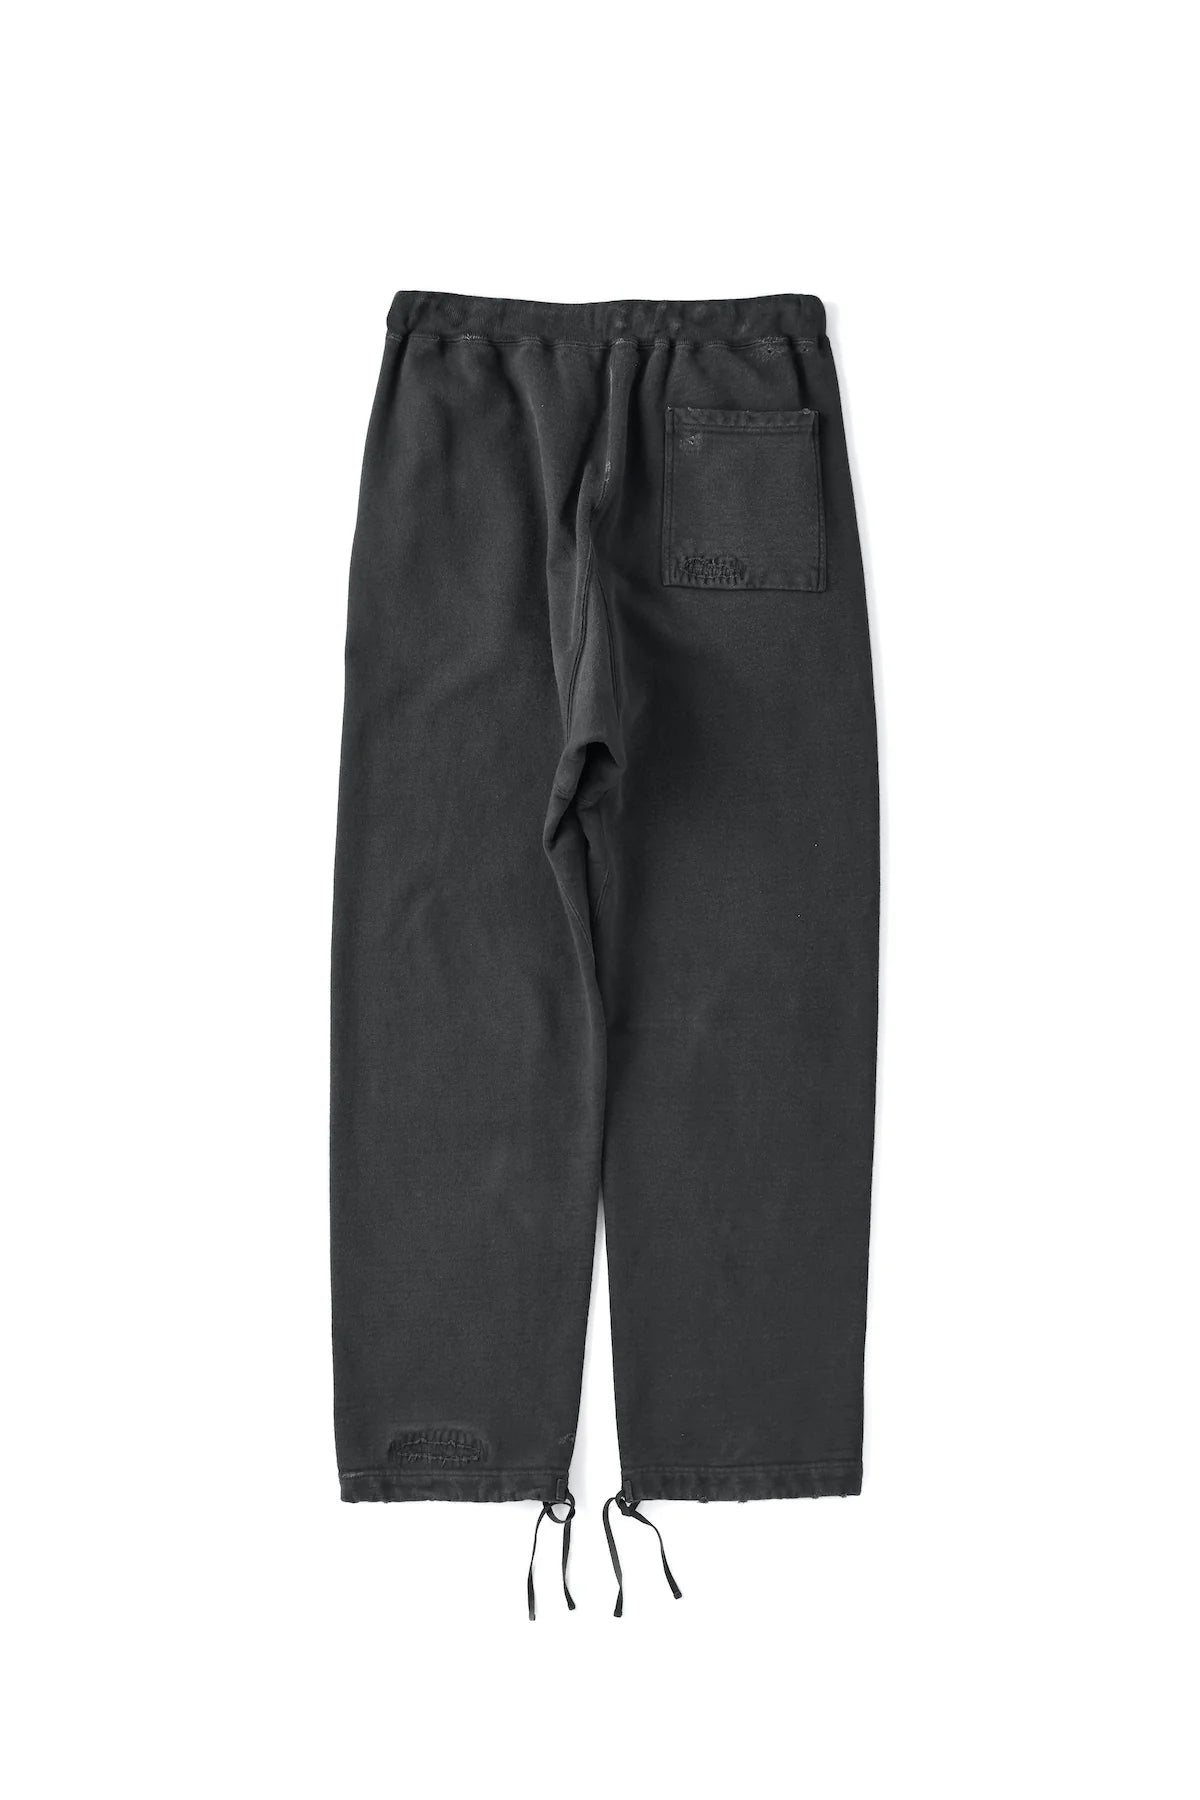 Old Joe RIBBED WAIST SPORTING TROUSER (SCAR FACE)